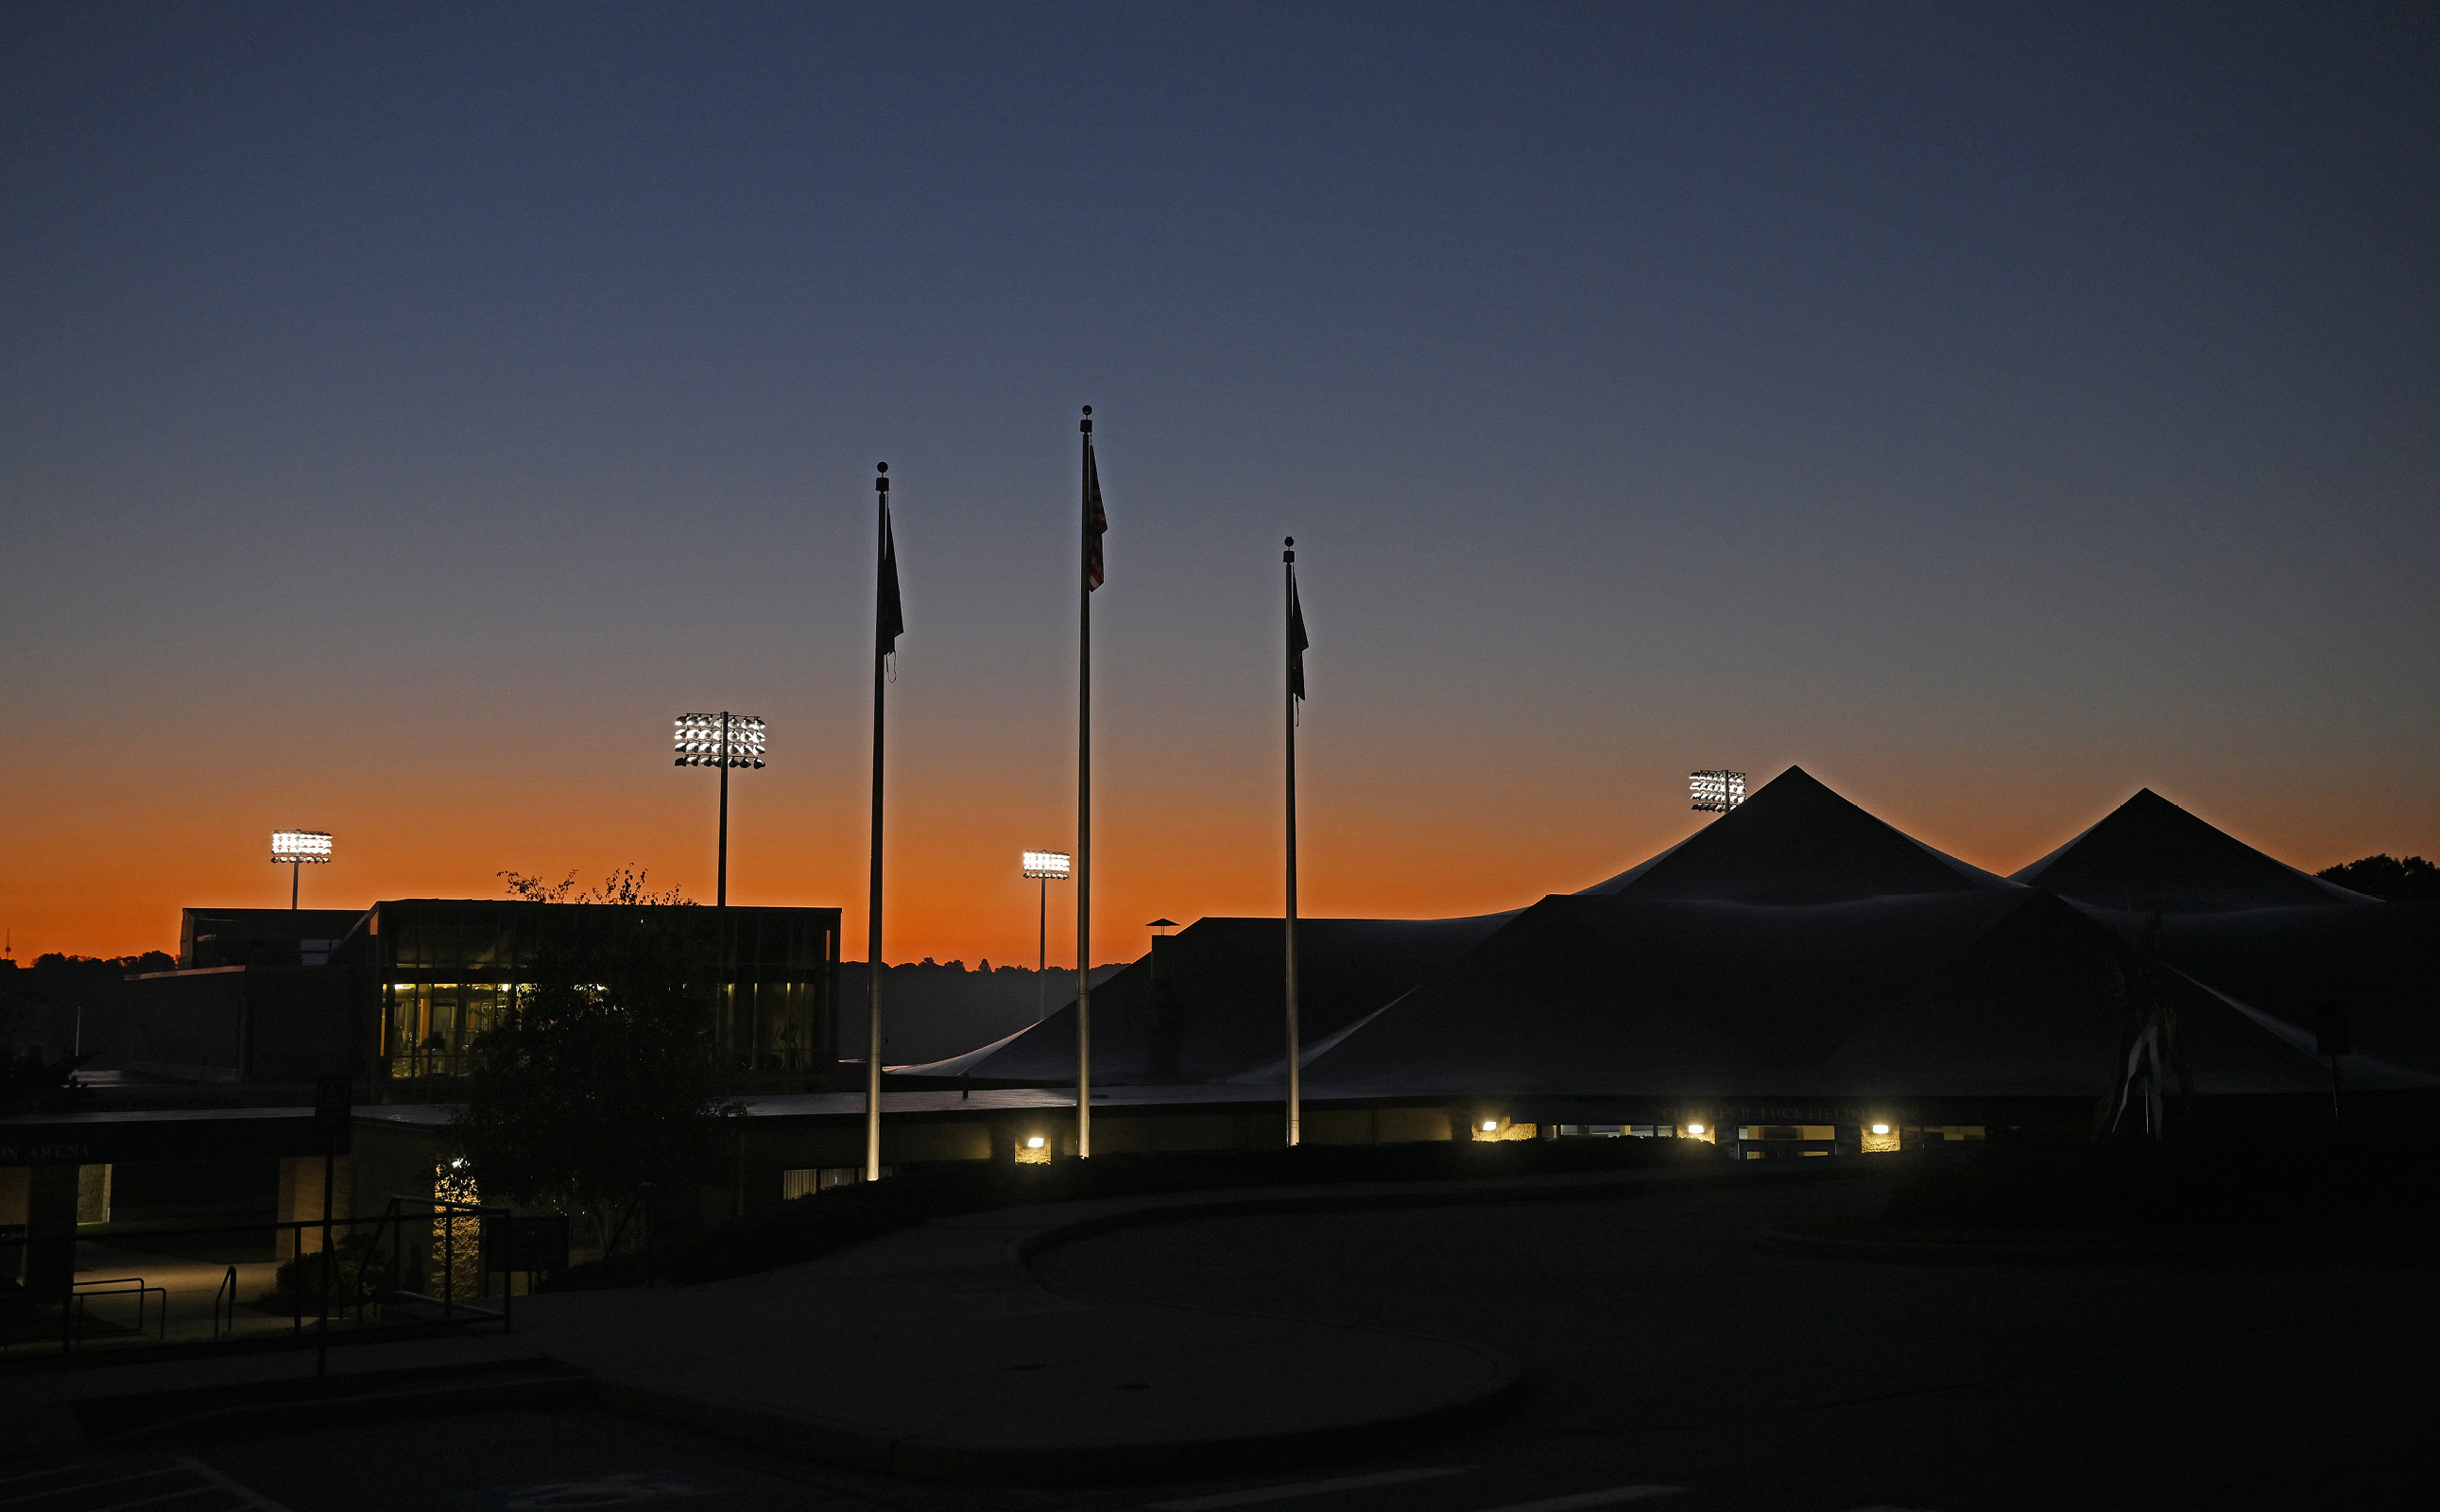 The Charles B. Luce Field House in the predawn October light.